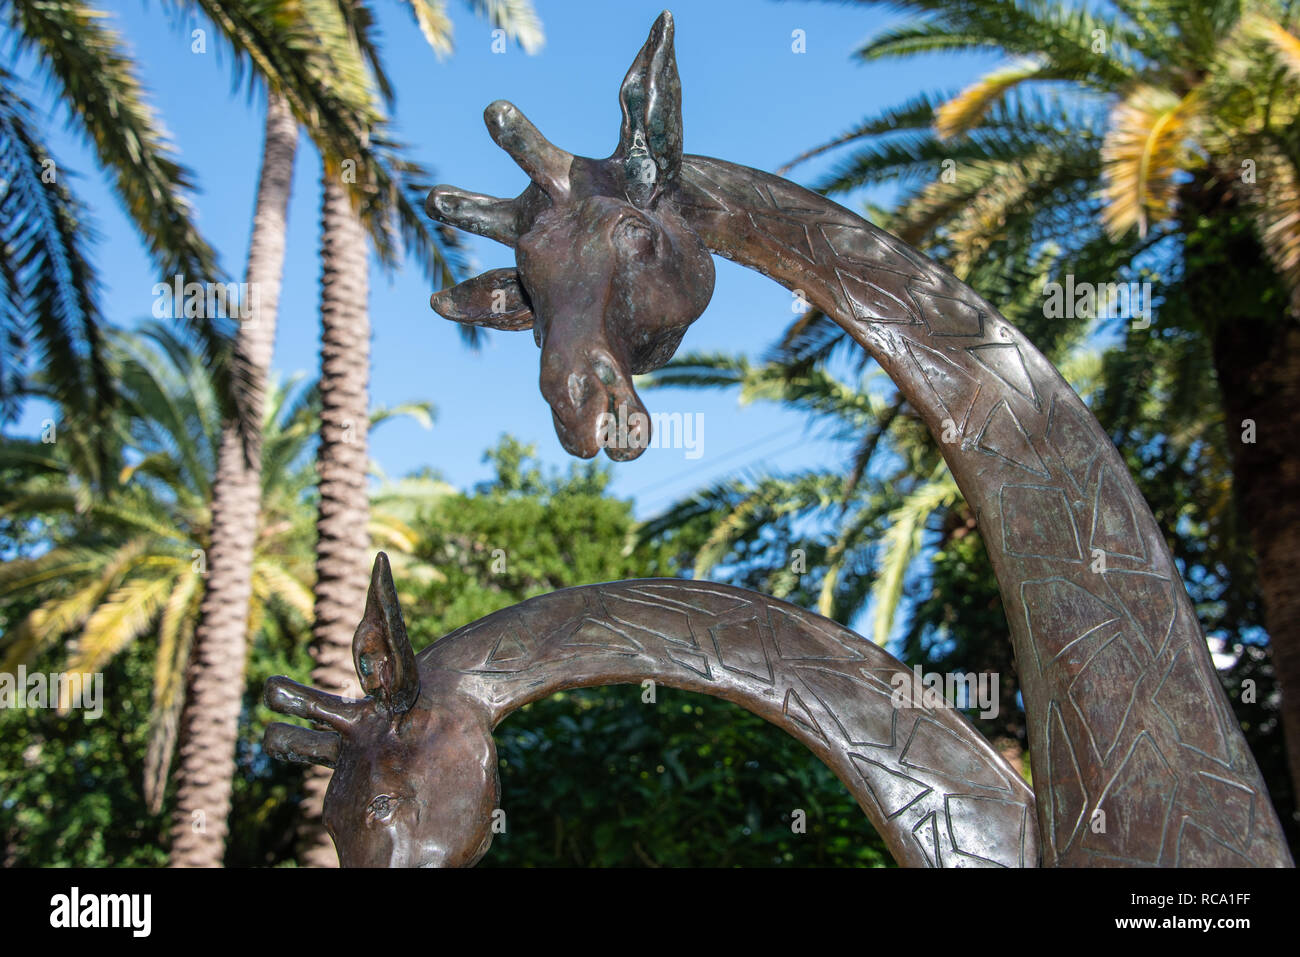 'Giraffes' bronze sculpture by American artist Henry Mitchell at the Philip Hulitar Sculpture Garden, Society of the Four Arts, Palm Beach, Florida. Stock Photo